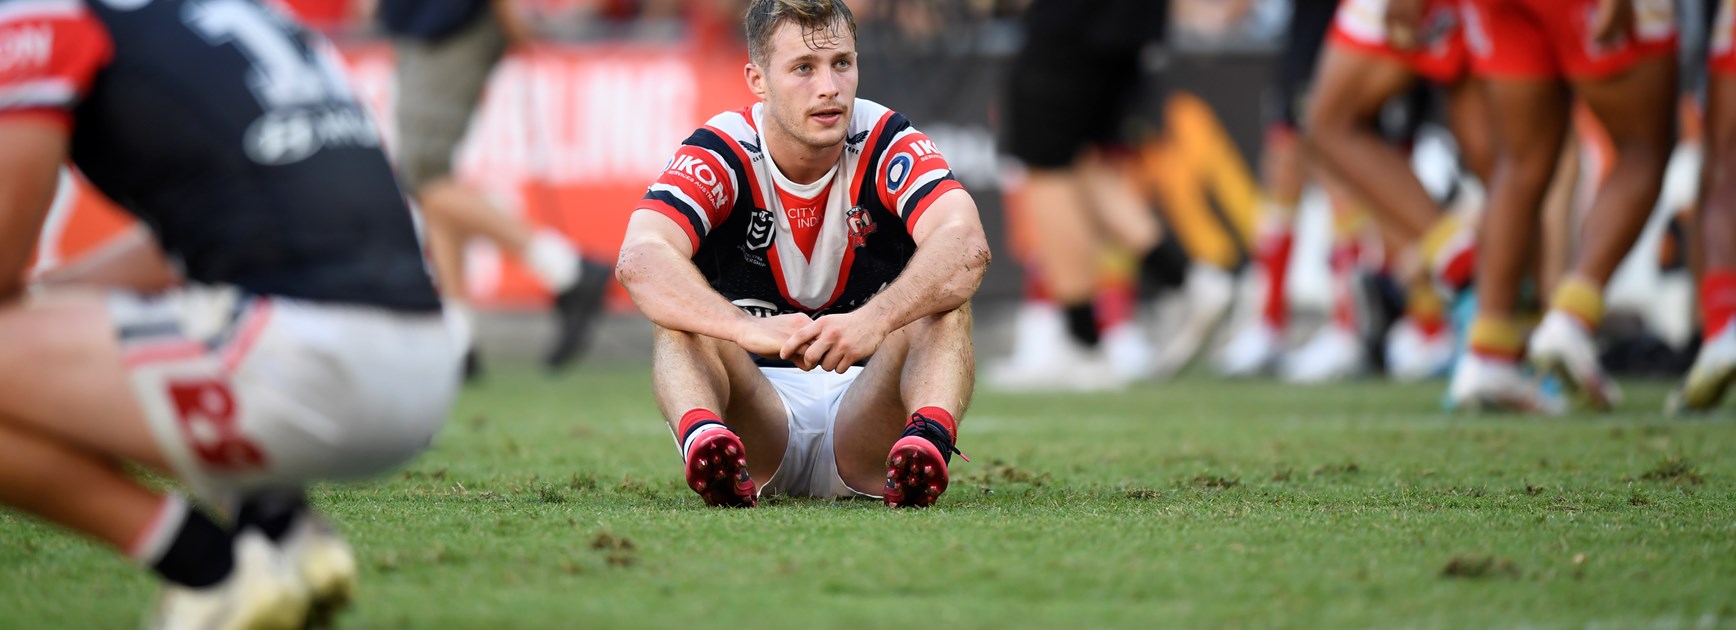 'Time to reflect on his game': Roosters back axed Walker as Crichton returns